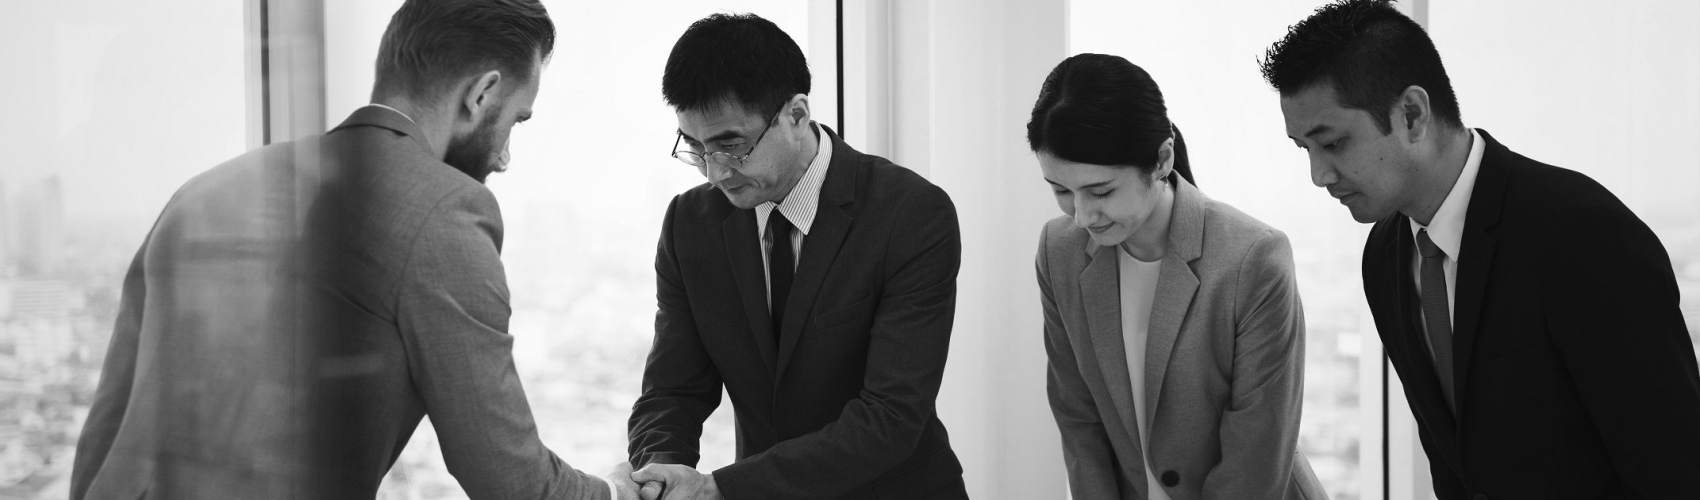 Japanese business people having a handshake with a colleague